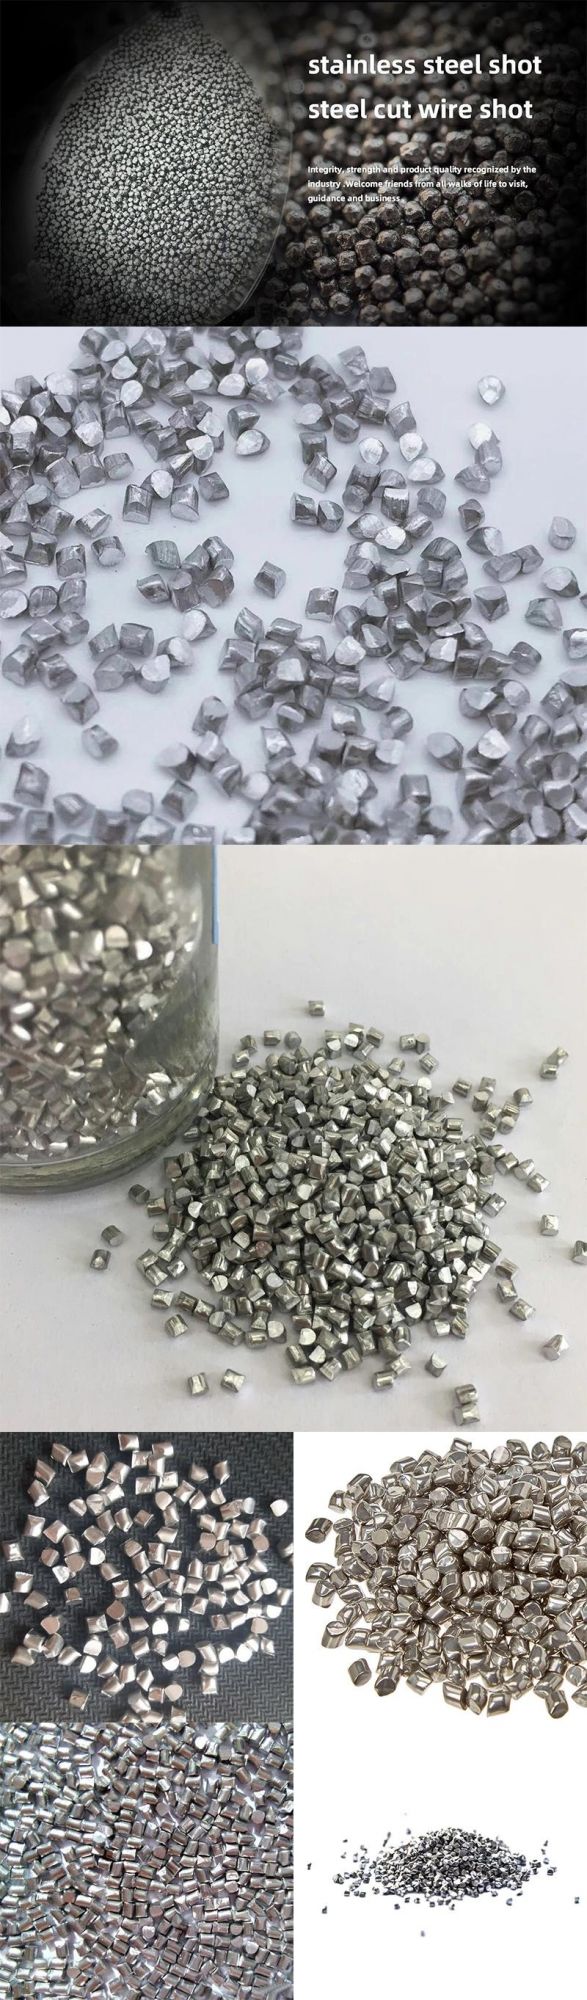 Aluminum Cut Wire Shot for Shot Blasting Polishing From Chinese Supplier